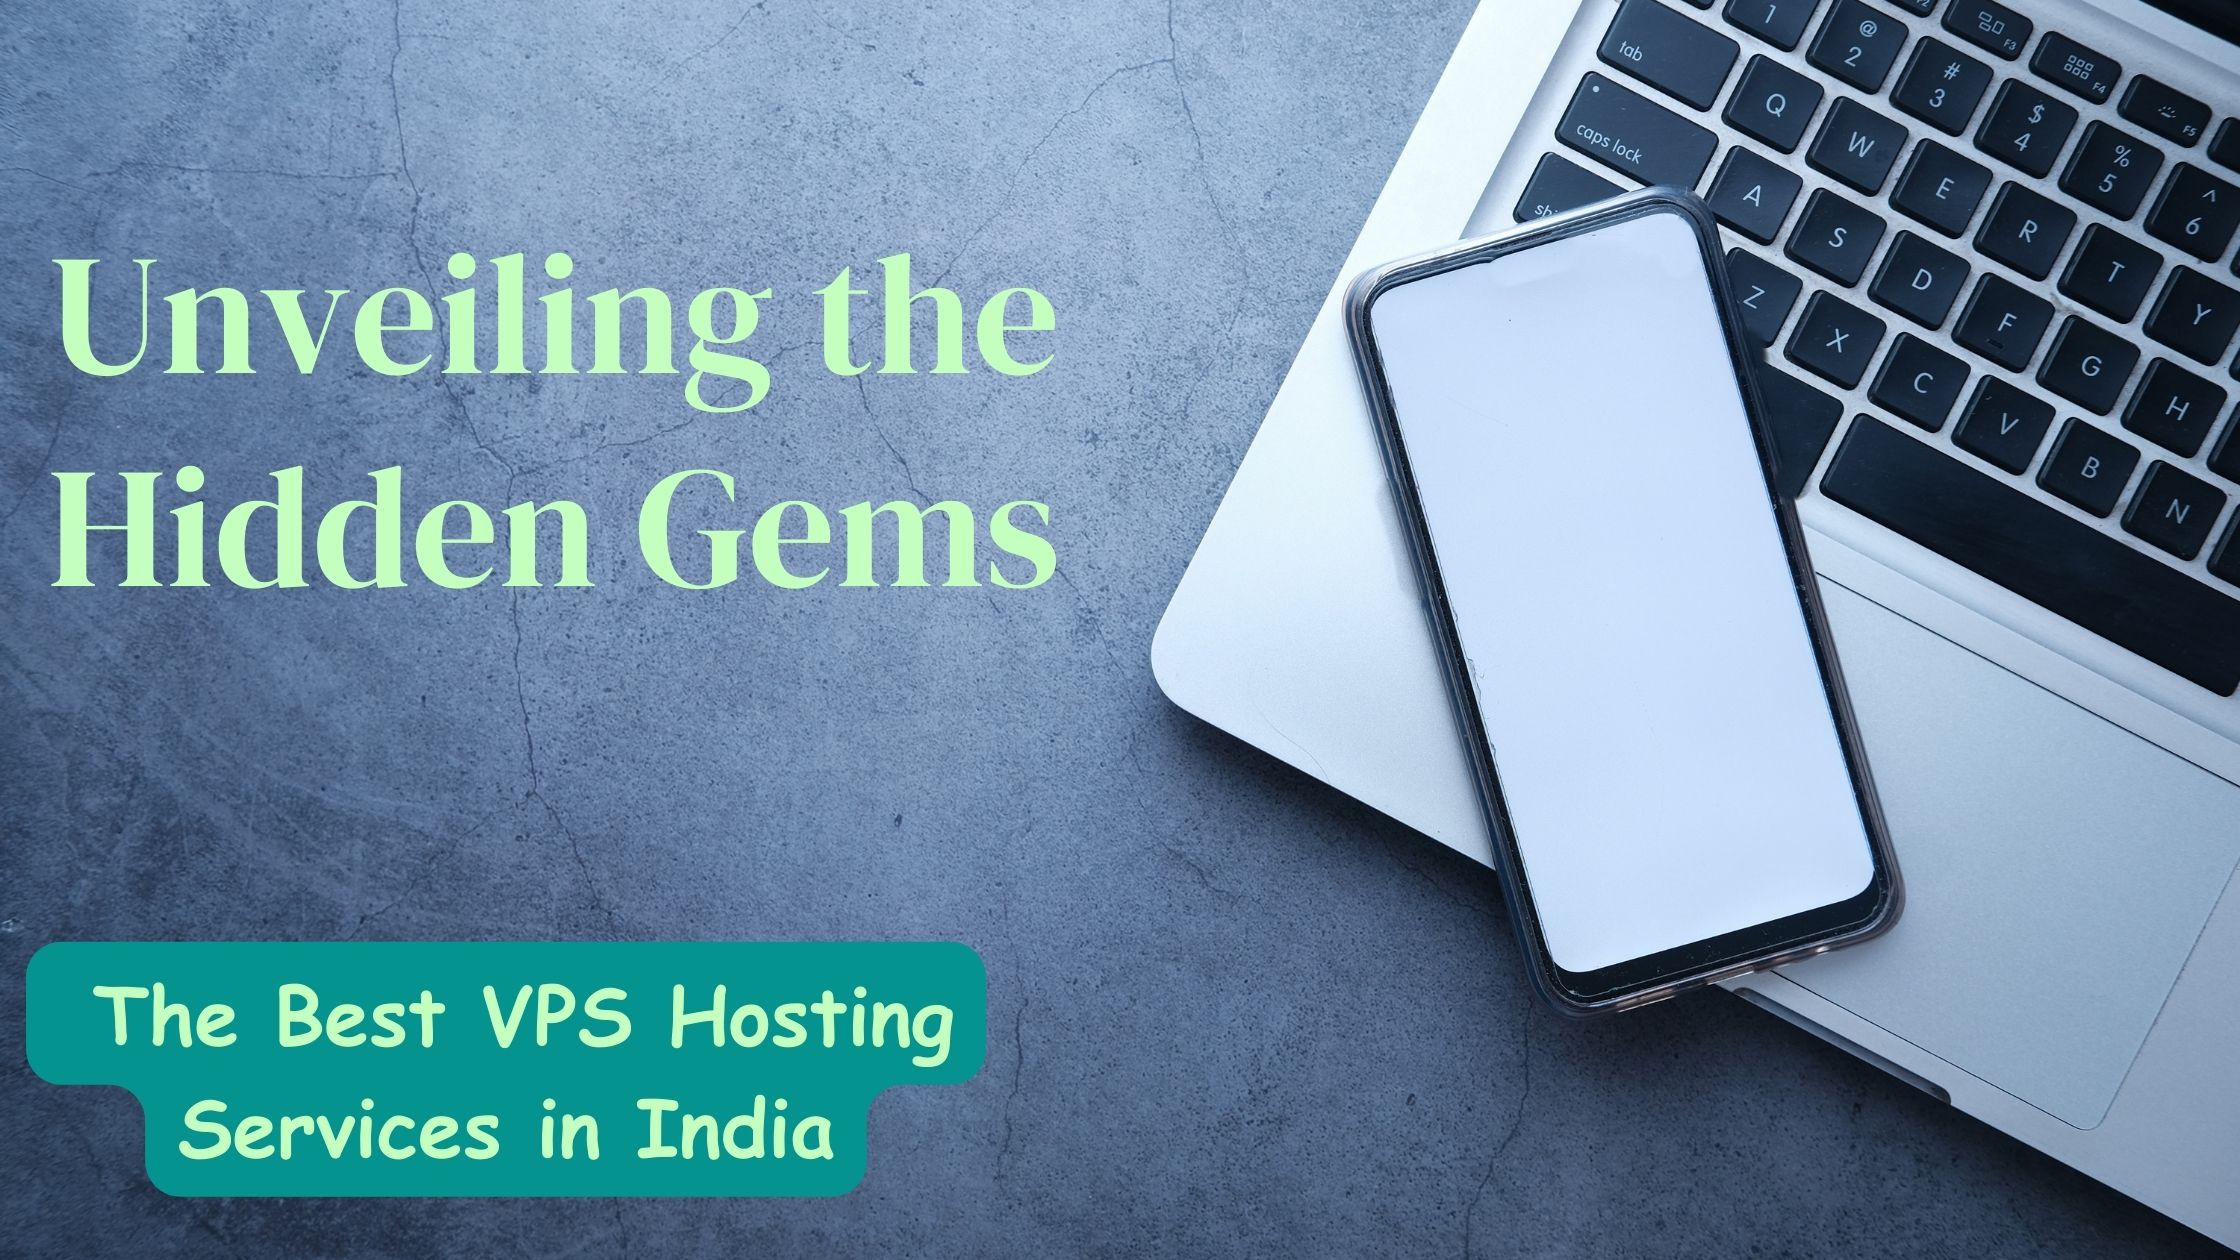 Unveiling the Hidden Gems: The Best VPS Hosting Services in India